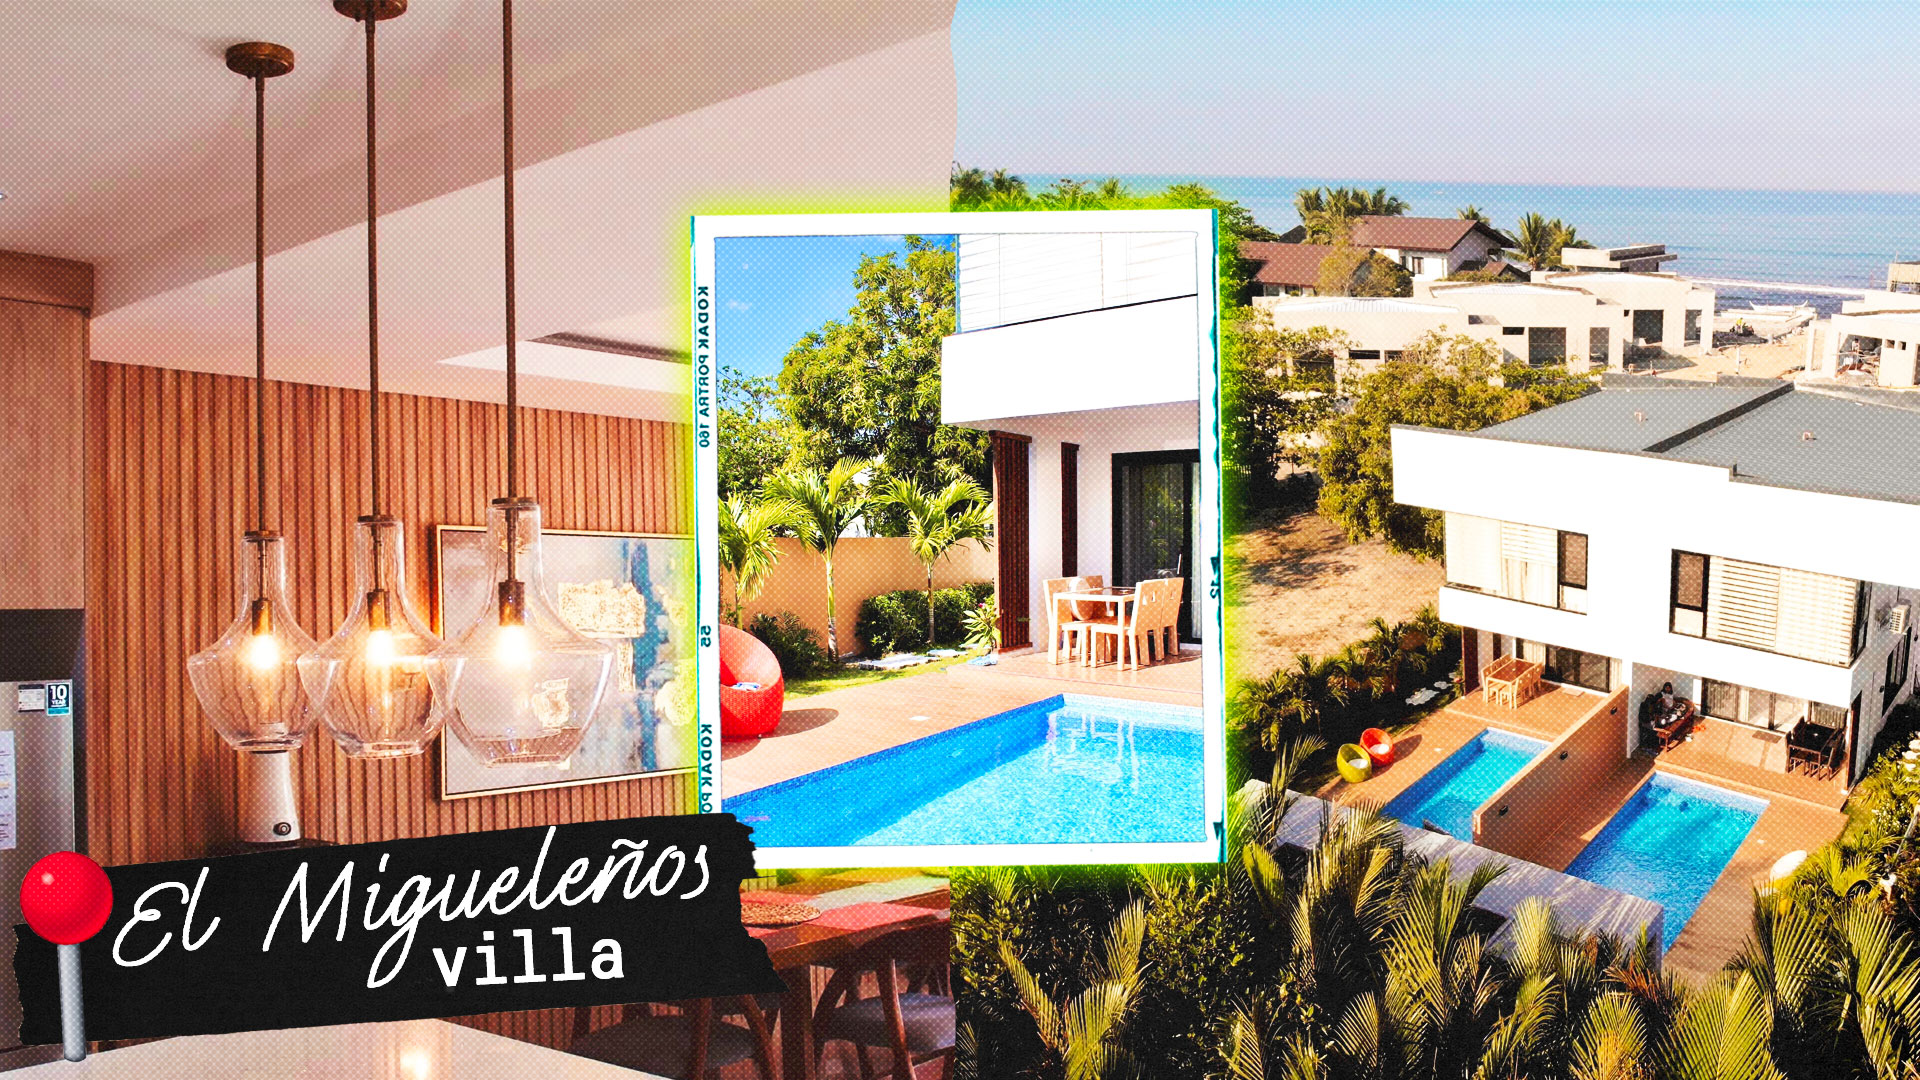 Have A Relaxing Staycation At El Migueleños Villa in Batangas